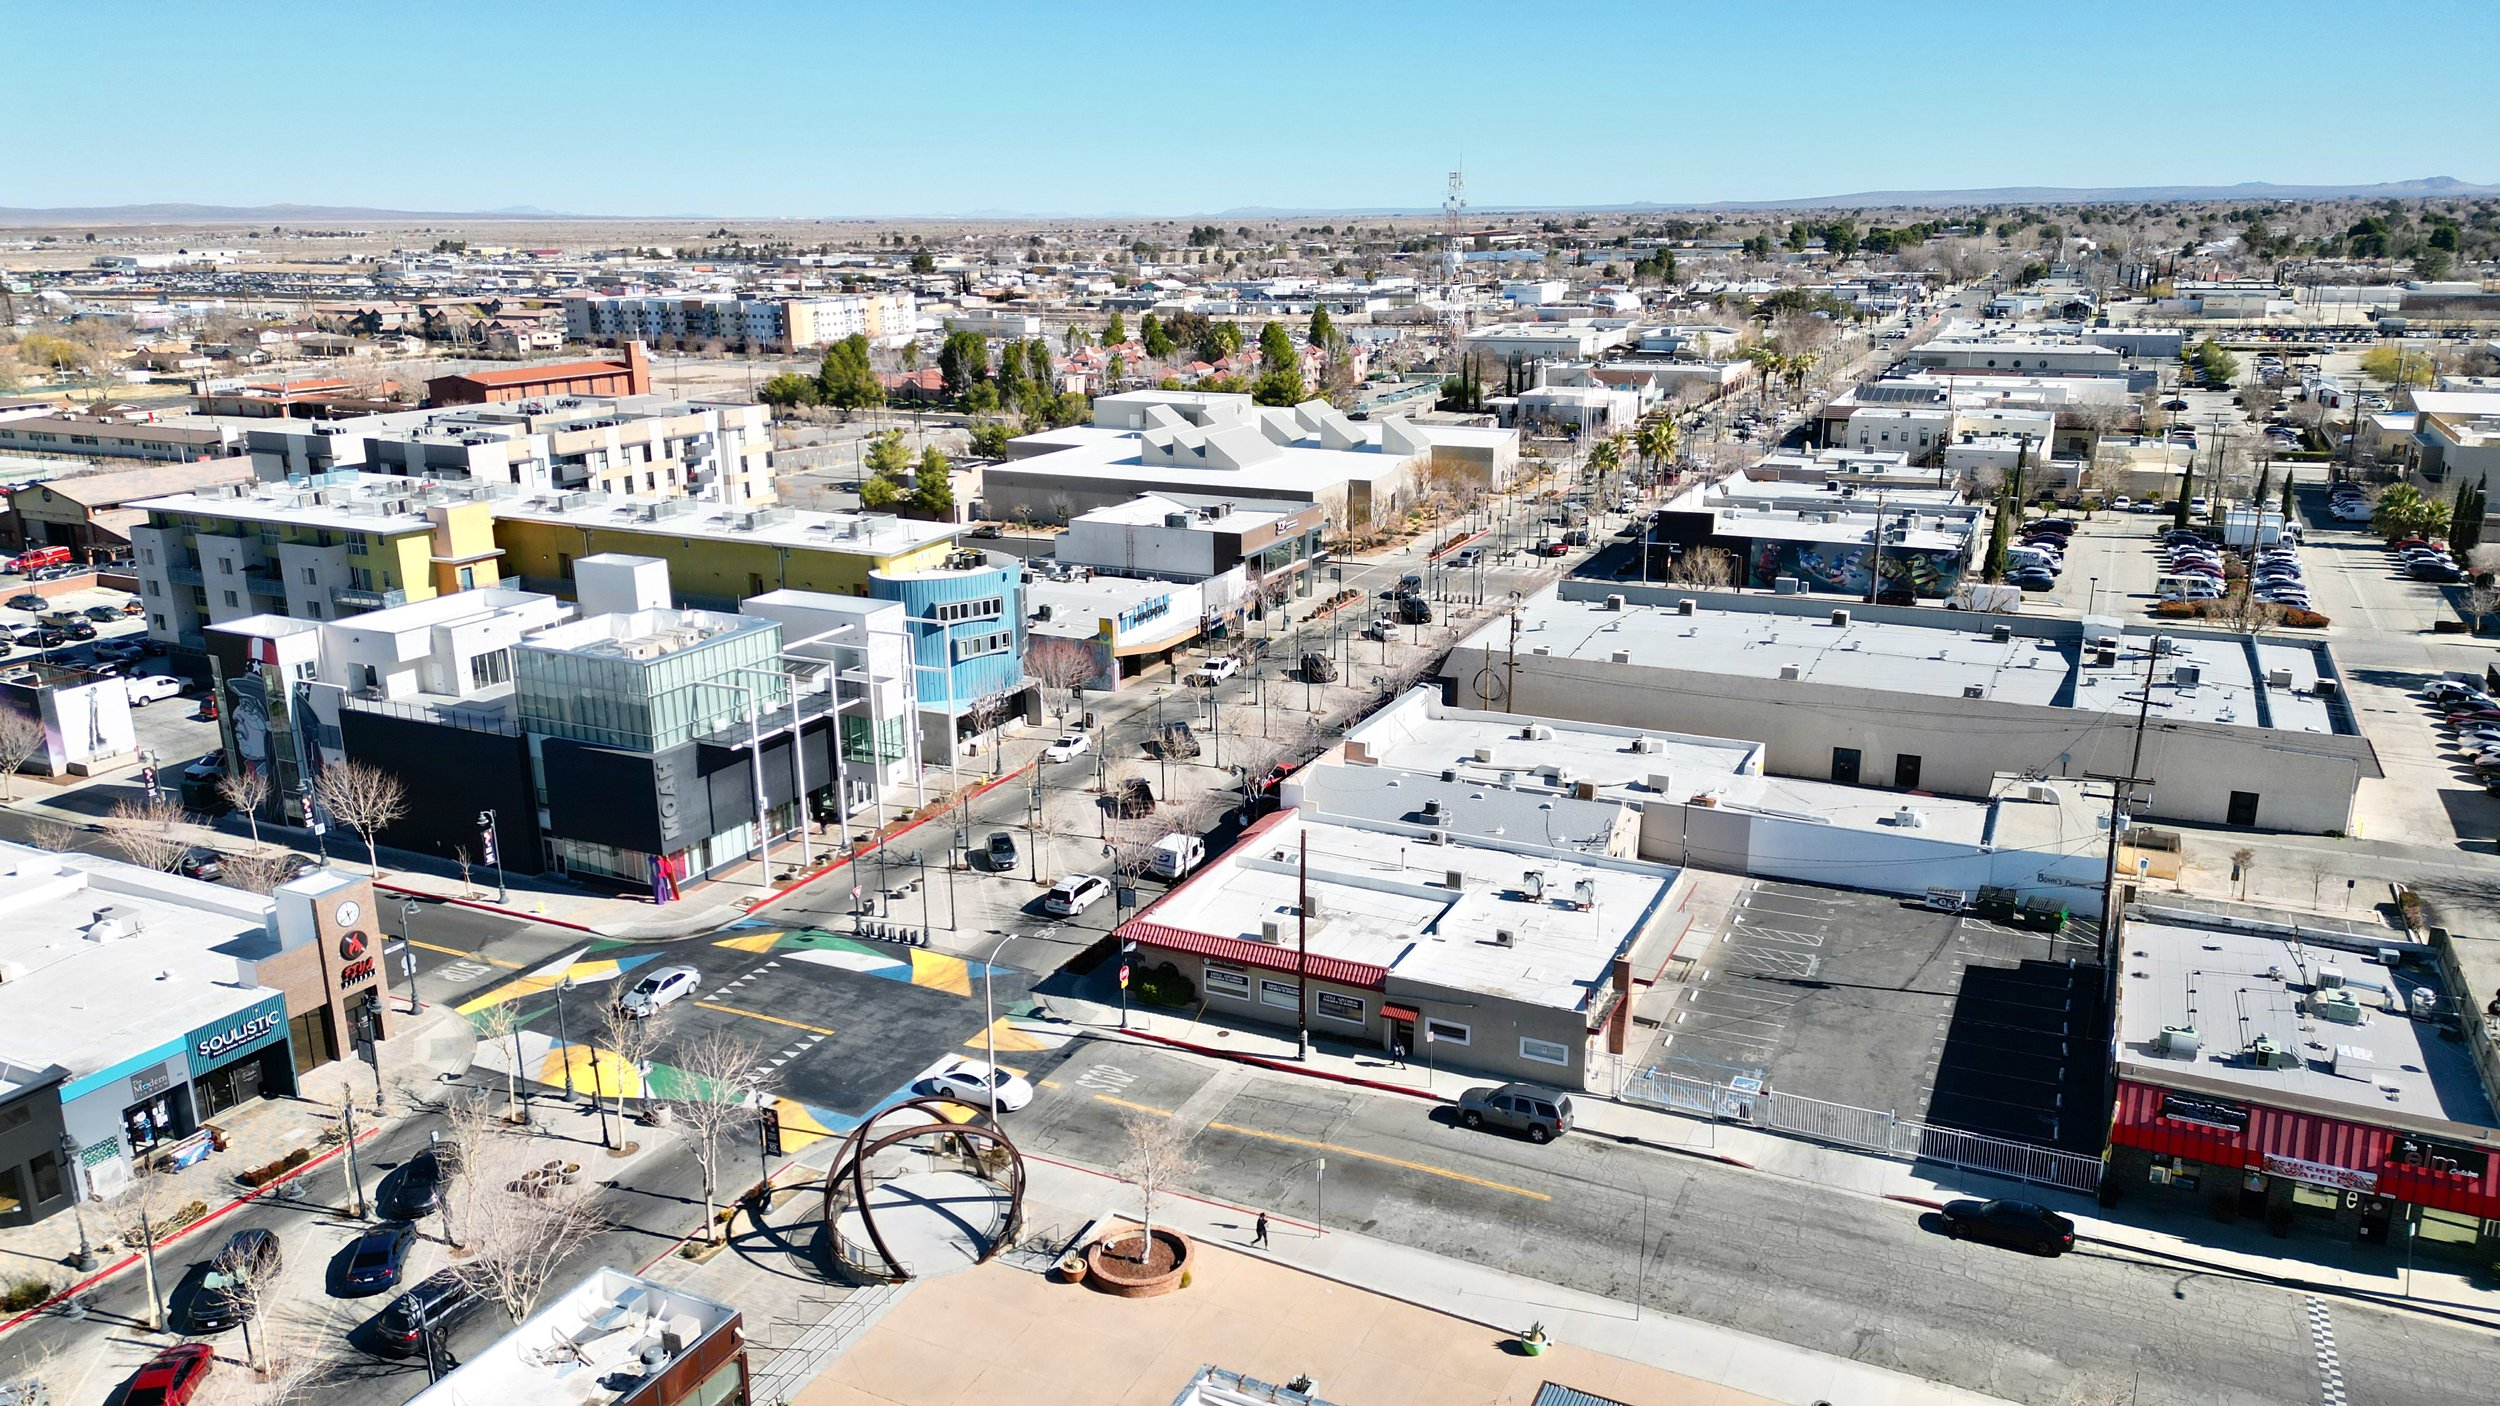 Overhead view of a street corner with colorful buildings and a desert backdrop.